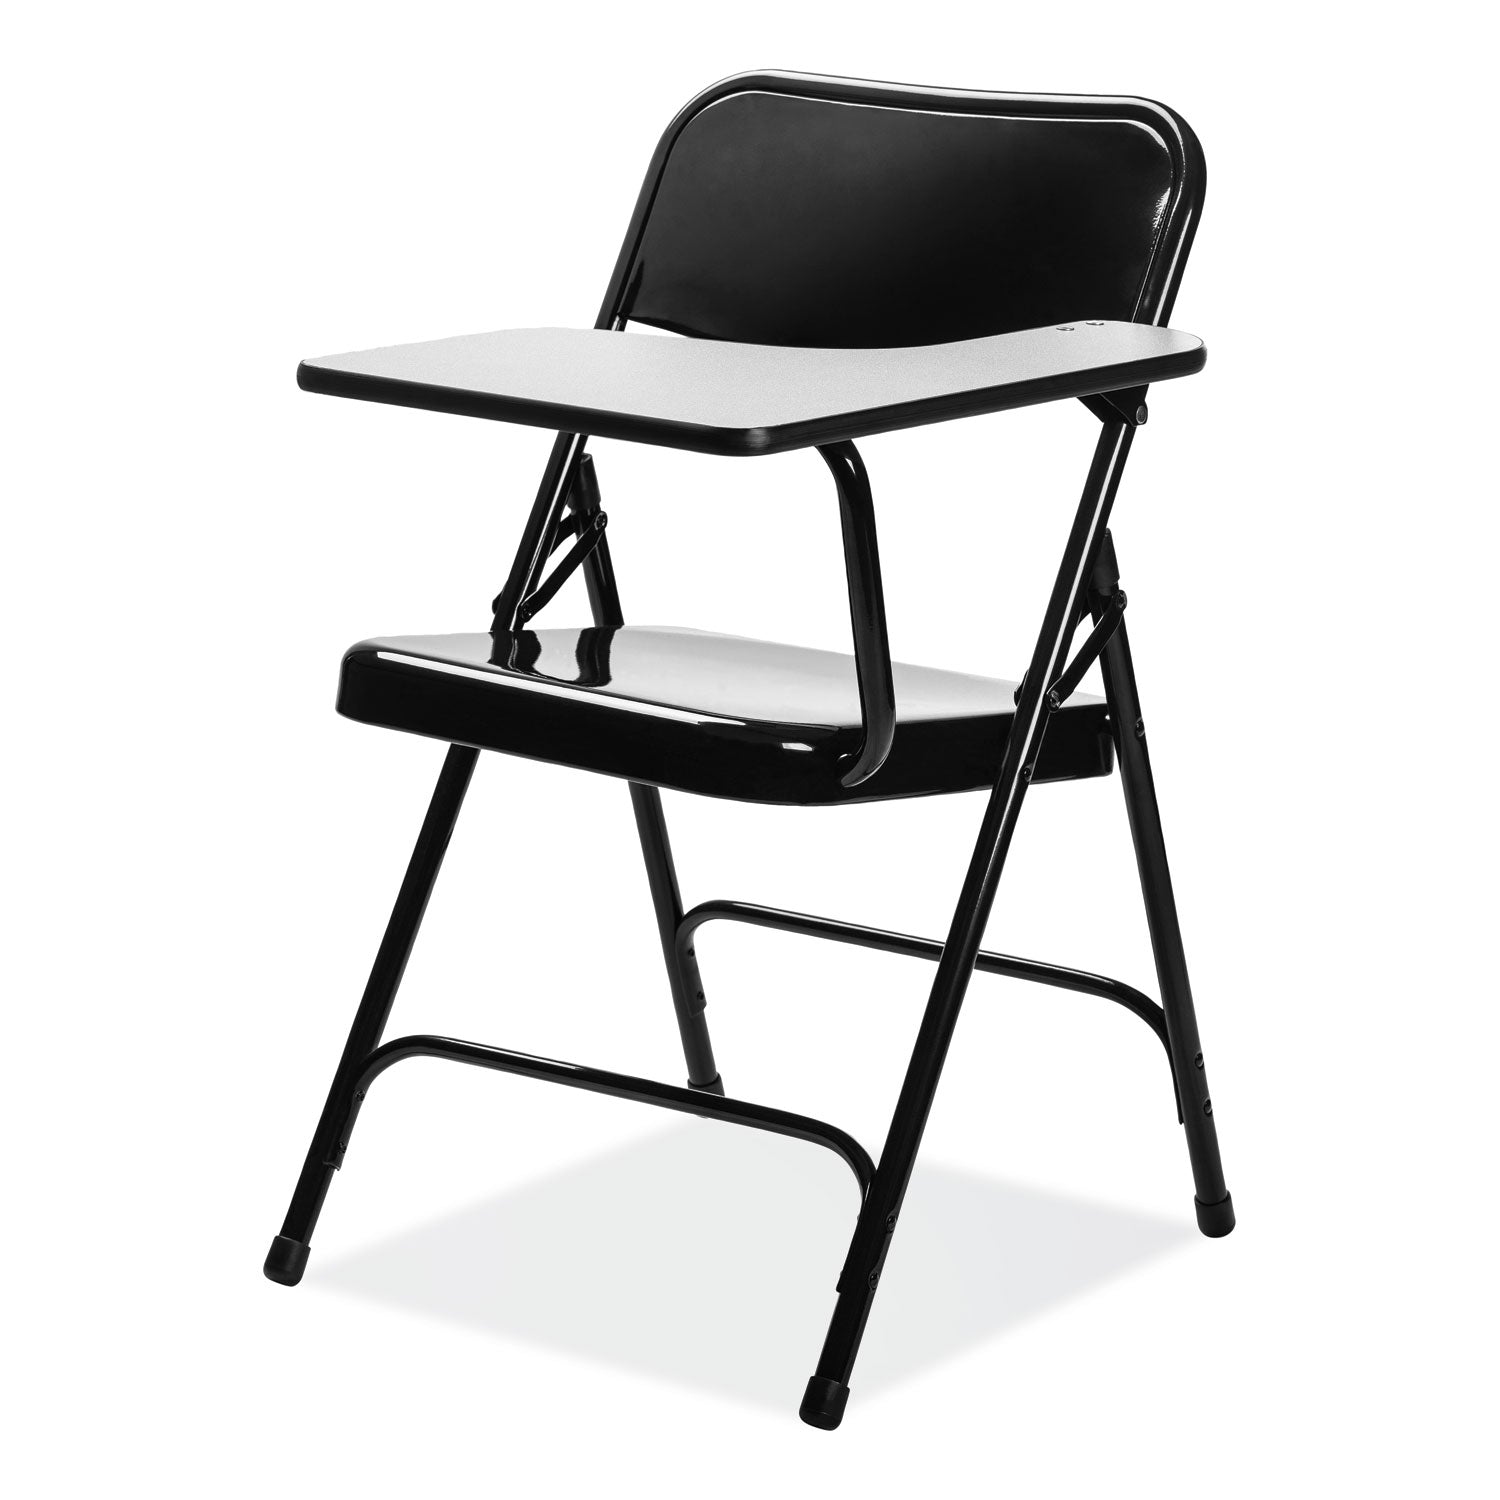 5200-series-left-side-tablet-arm-folding-chair-supports-480-lb-1725-seat-height-black-2-carton-ships-in-1-3-bus-days_nps5210l - 3